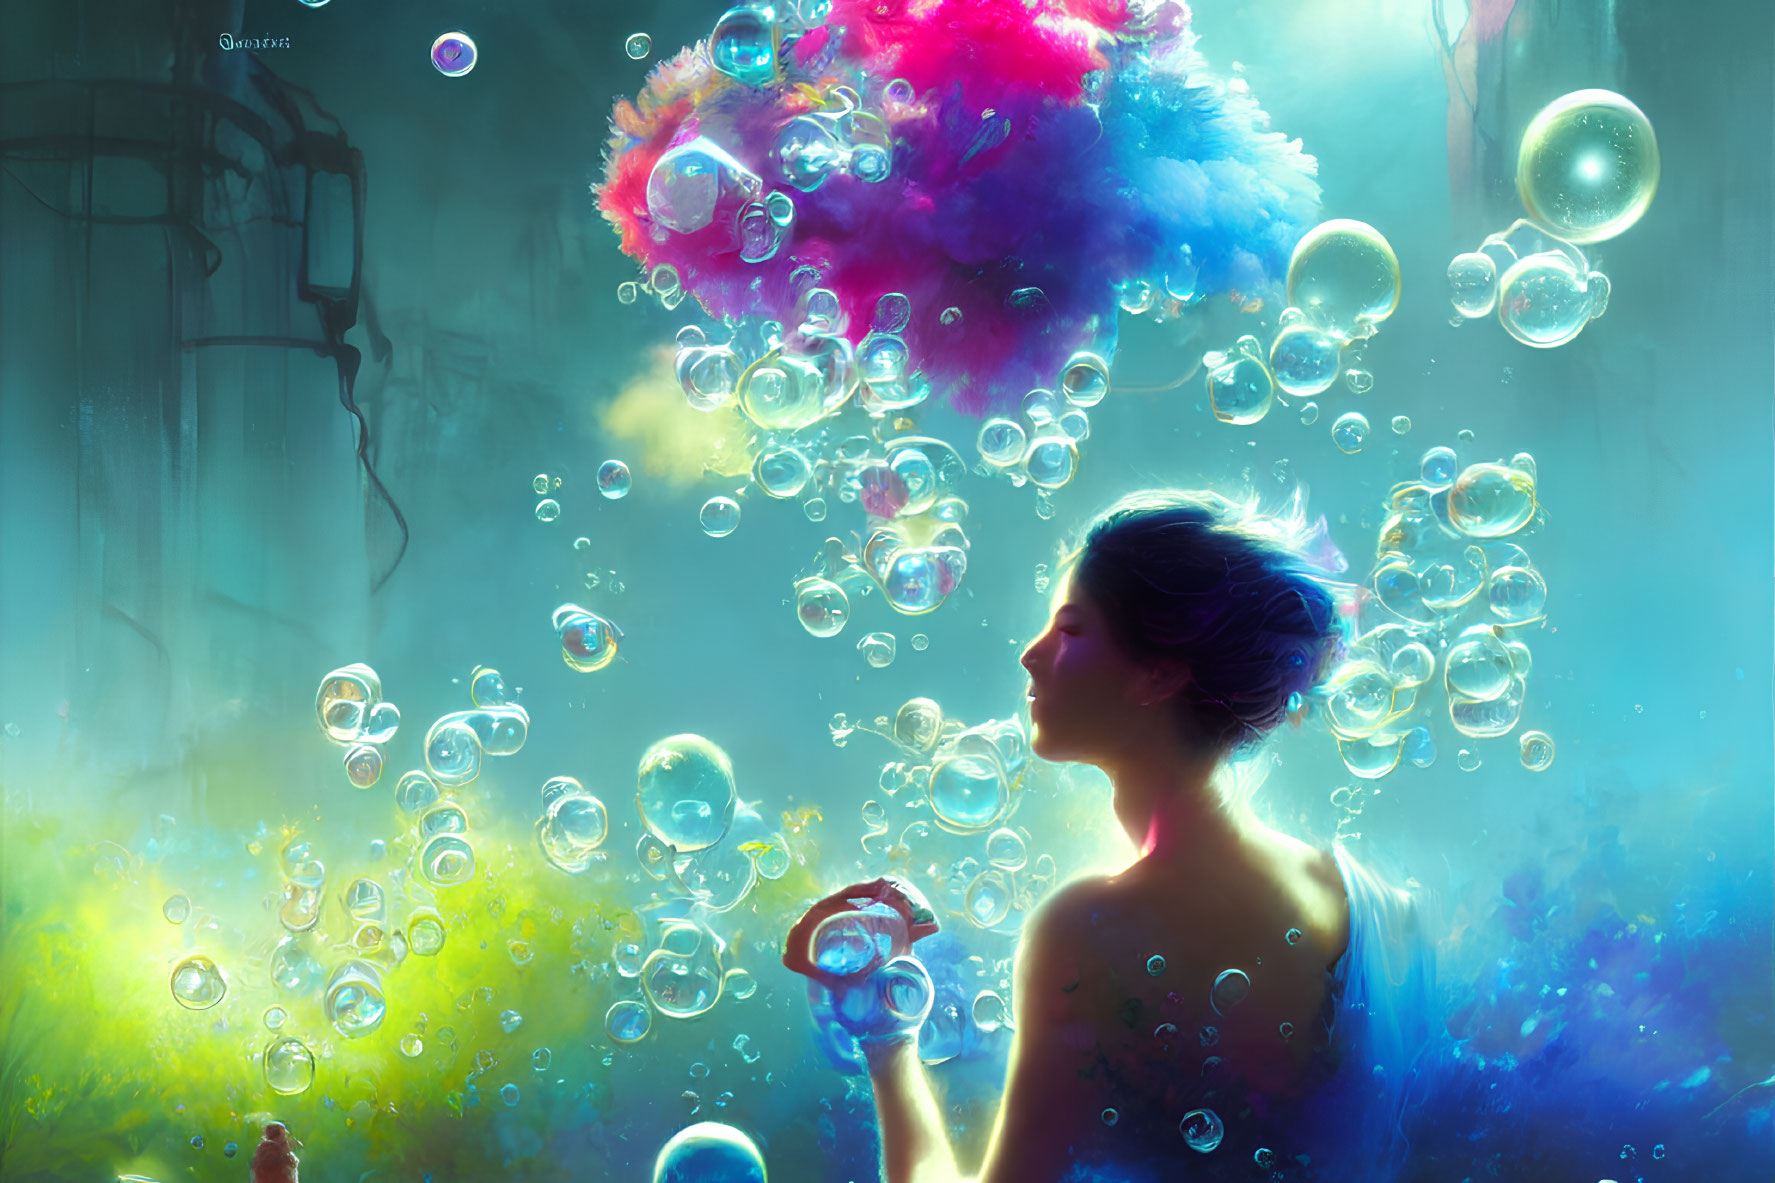 Vibrant underwater dreamscape with woman and luminous bubbles